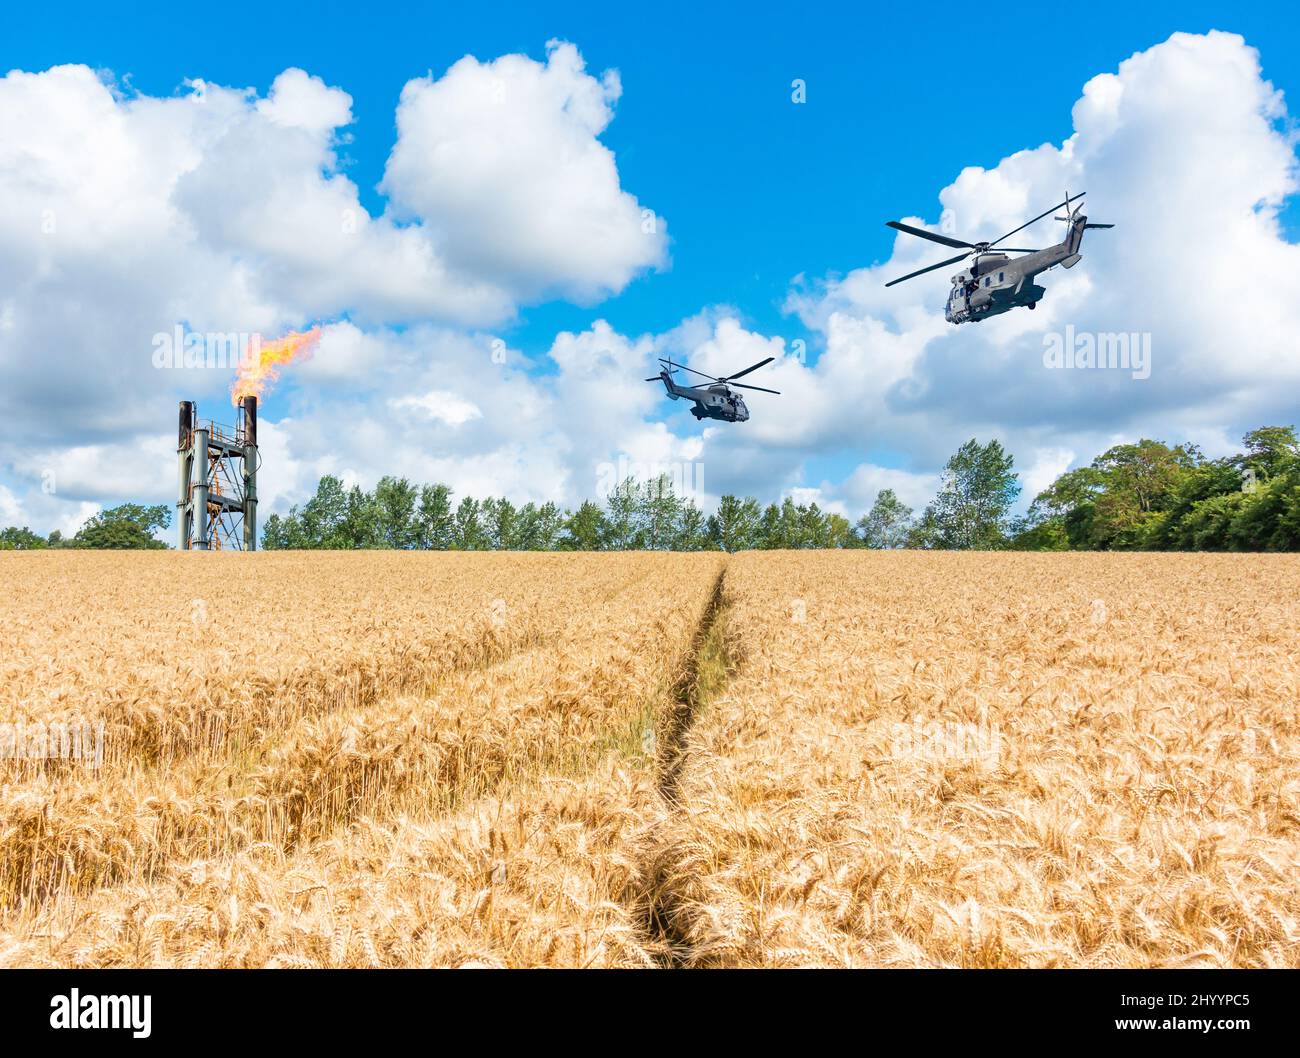 Military helicopters flying over wheat field and gas plant chimney. Concept image: Ukraine Russia conflict, wheat, food shortage, Russian sanctions... Stock Photo